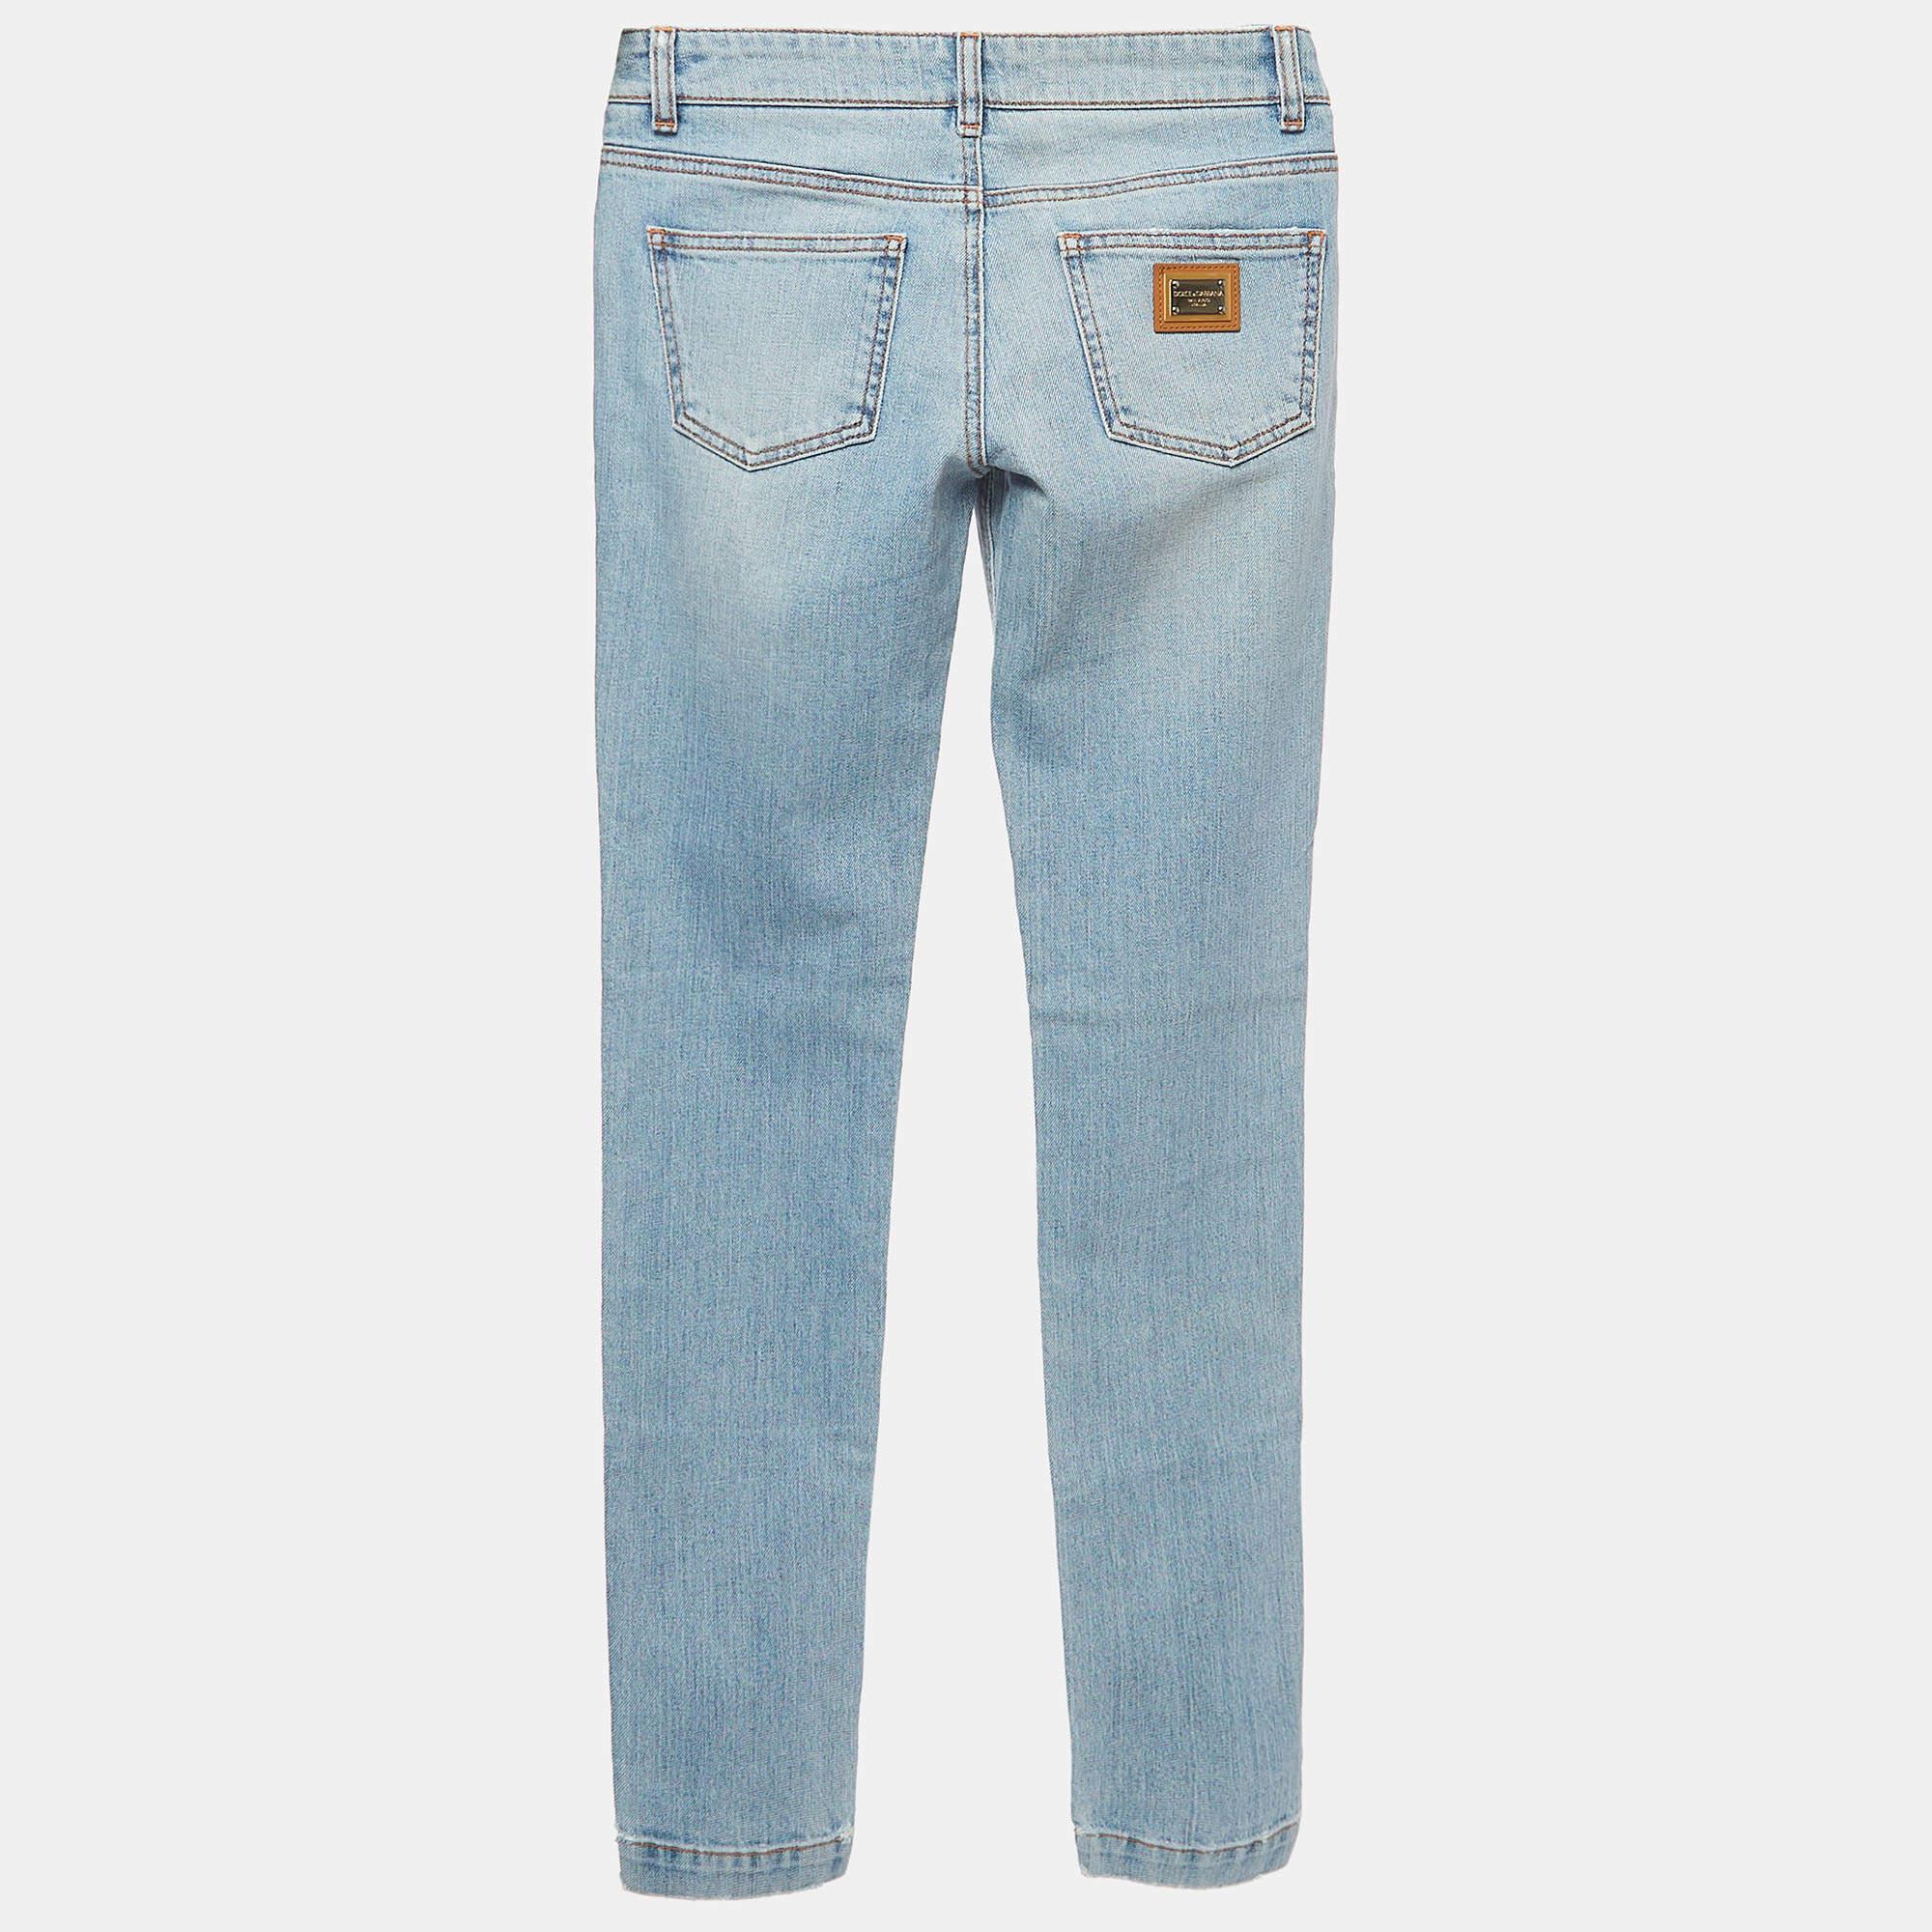 Your wardrobe can never be complete with a great pair of jeans like this. Tailored from best materials, this pair showcases classic detailing, an easy closure style, and pockets. Pair it with your casual t-shirts.

